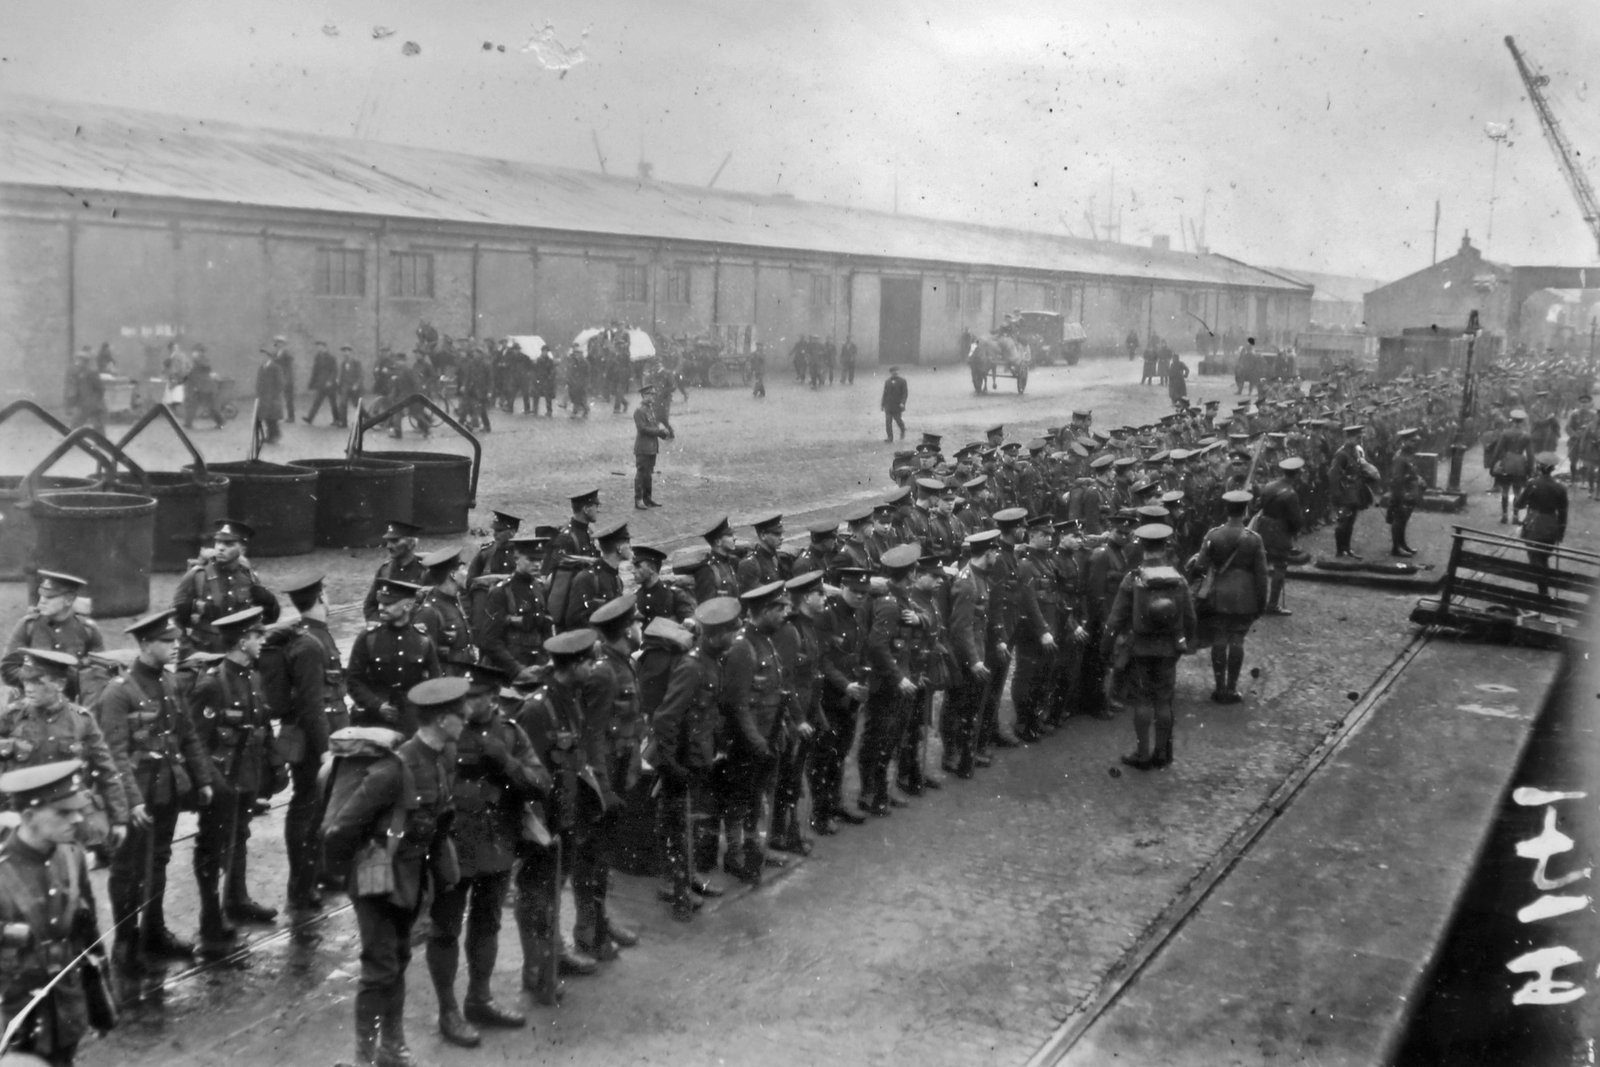 Image - Troops lined up on Quay prior to embarkation